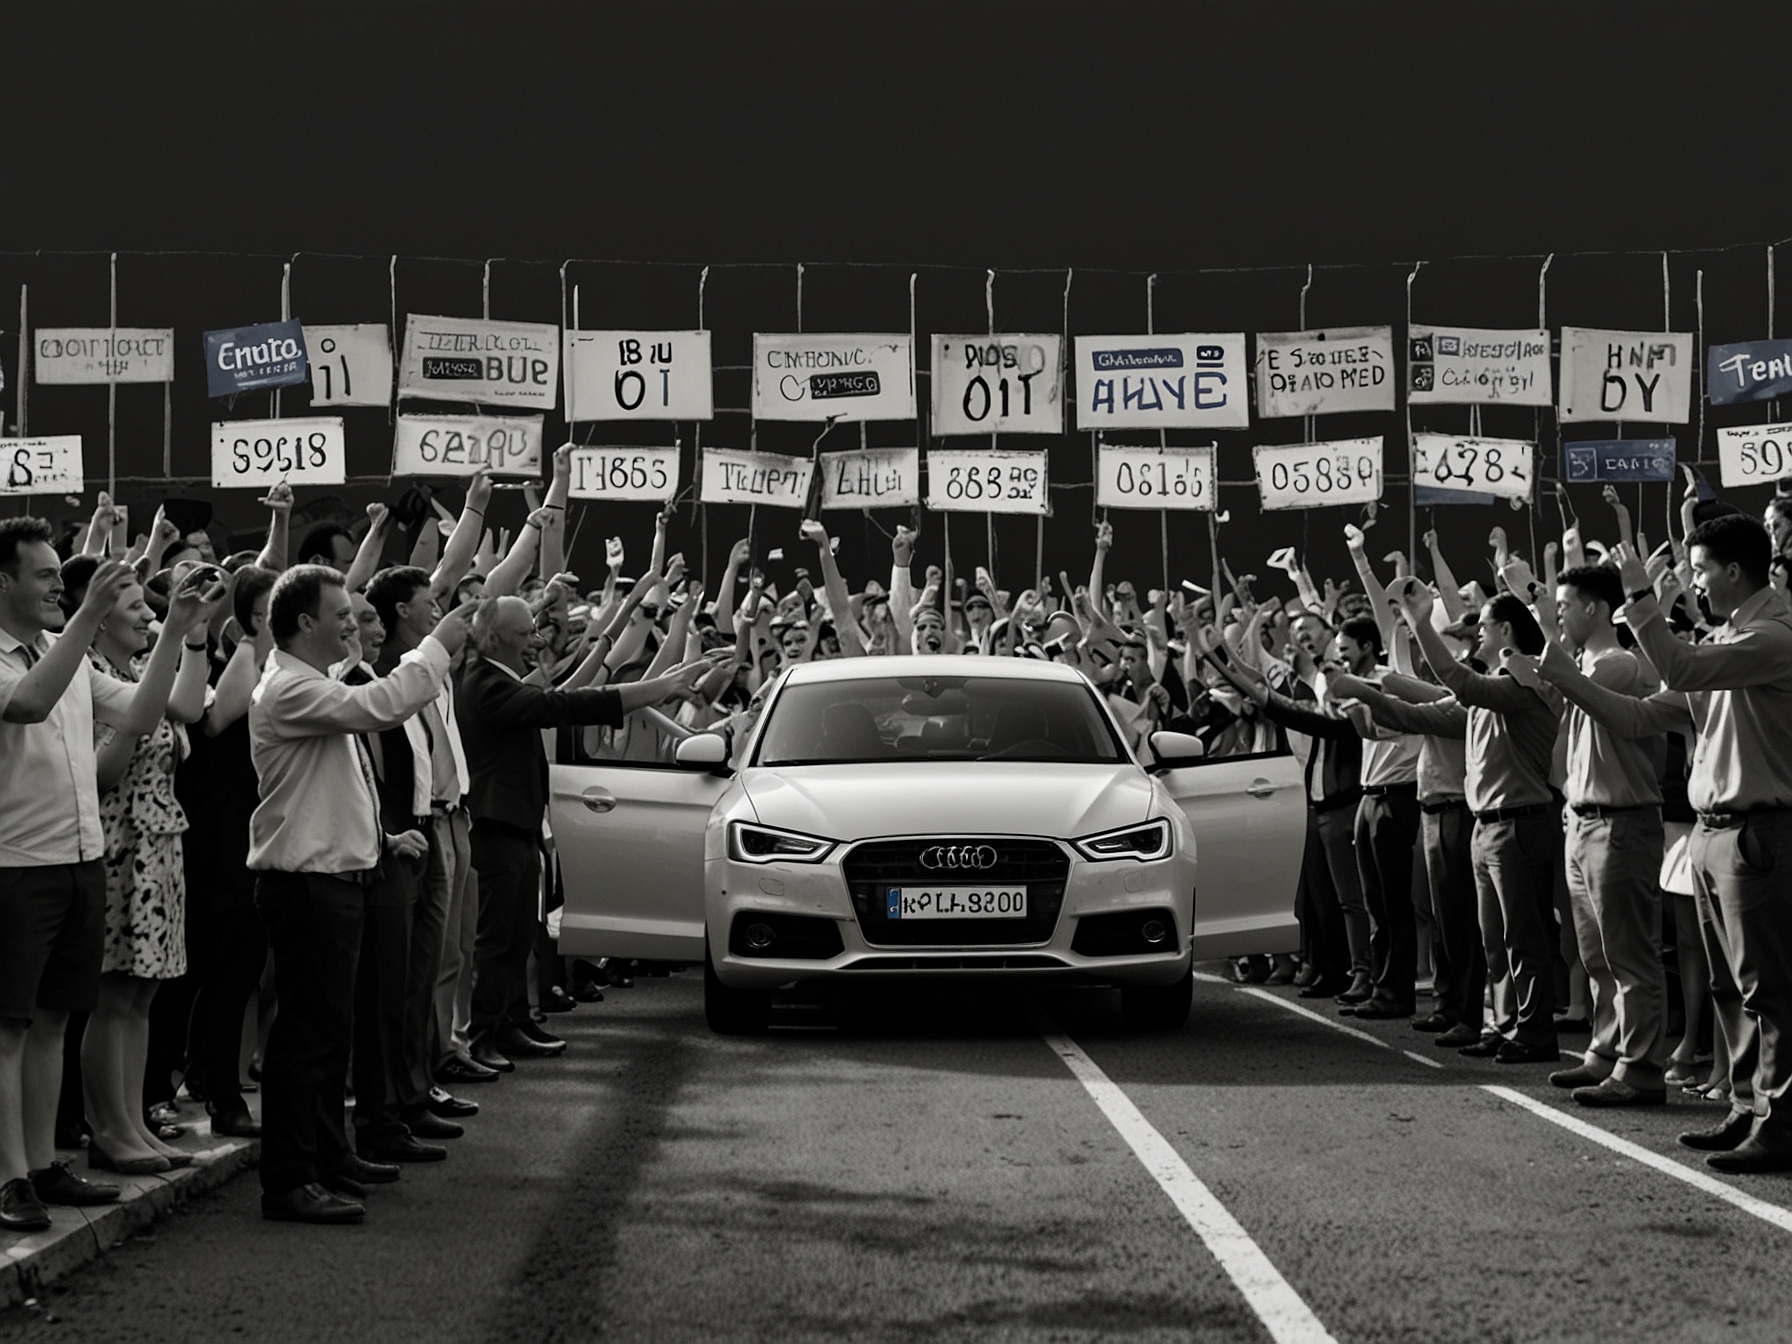 Image capturing the moment of the bidding war for the 'A1' number plate, illustrating the excitement and competitive spirit among the participants.